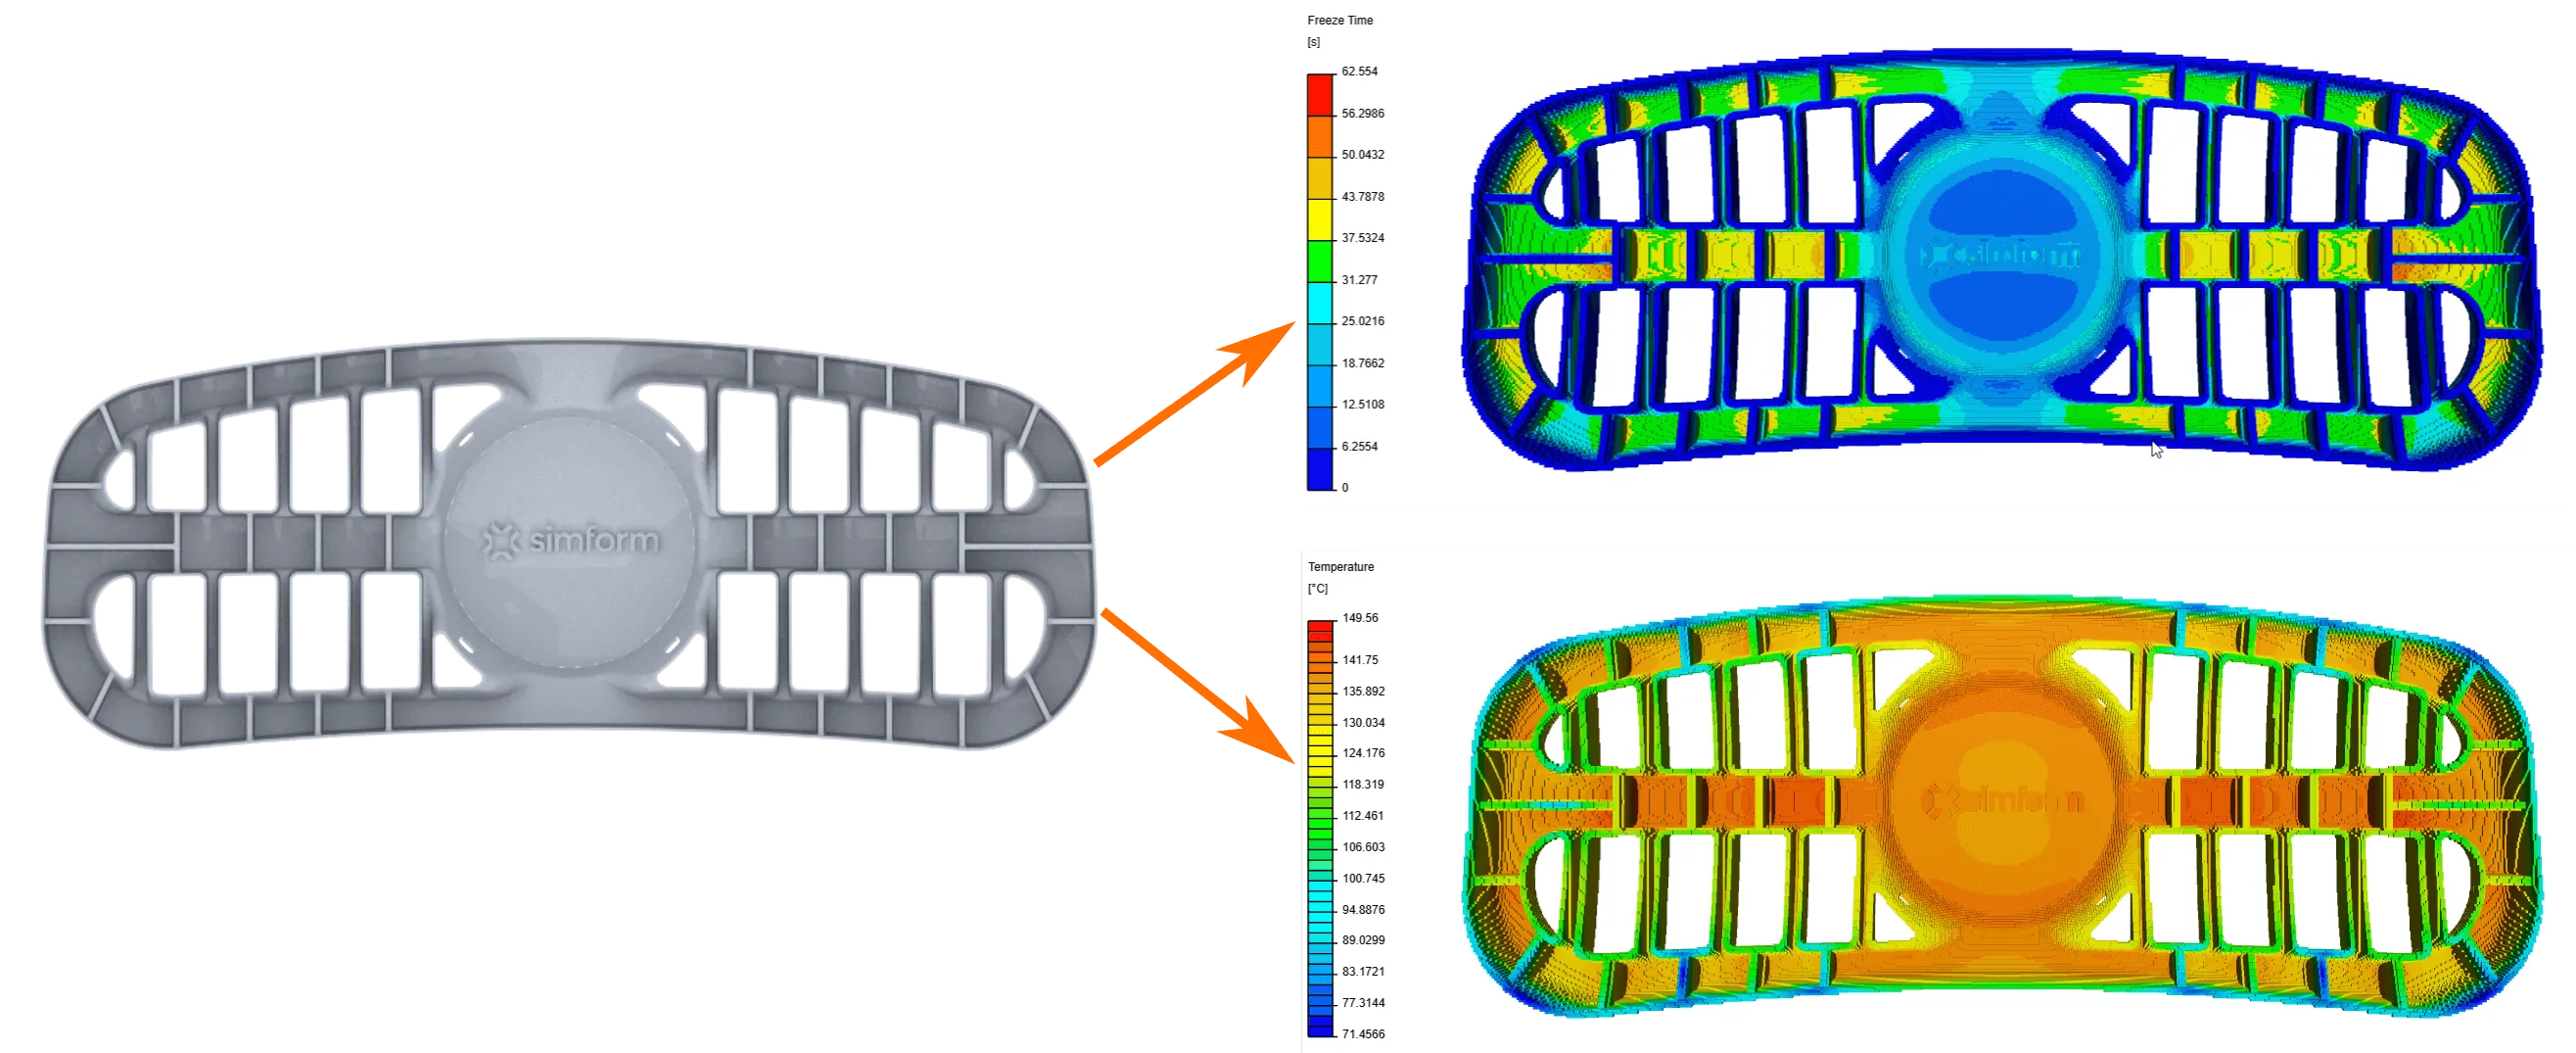 Cooling analysis of an injection molded part using SimForm Feasibility